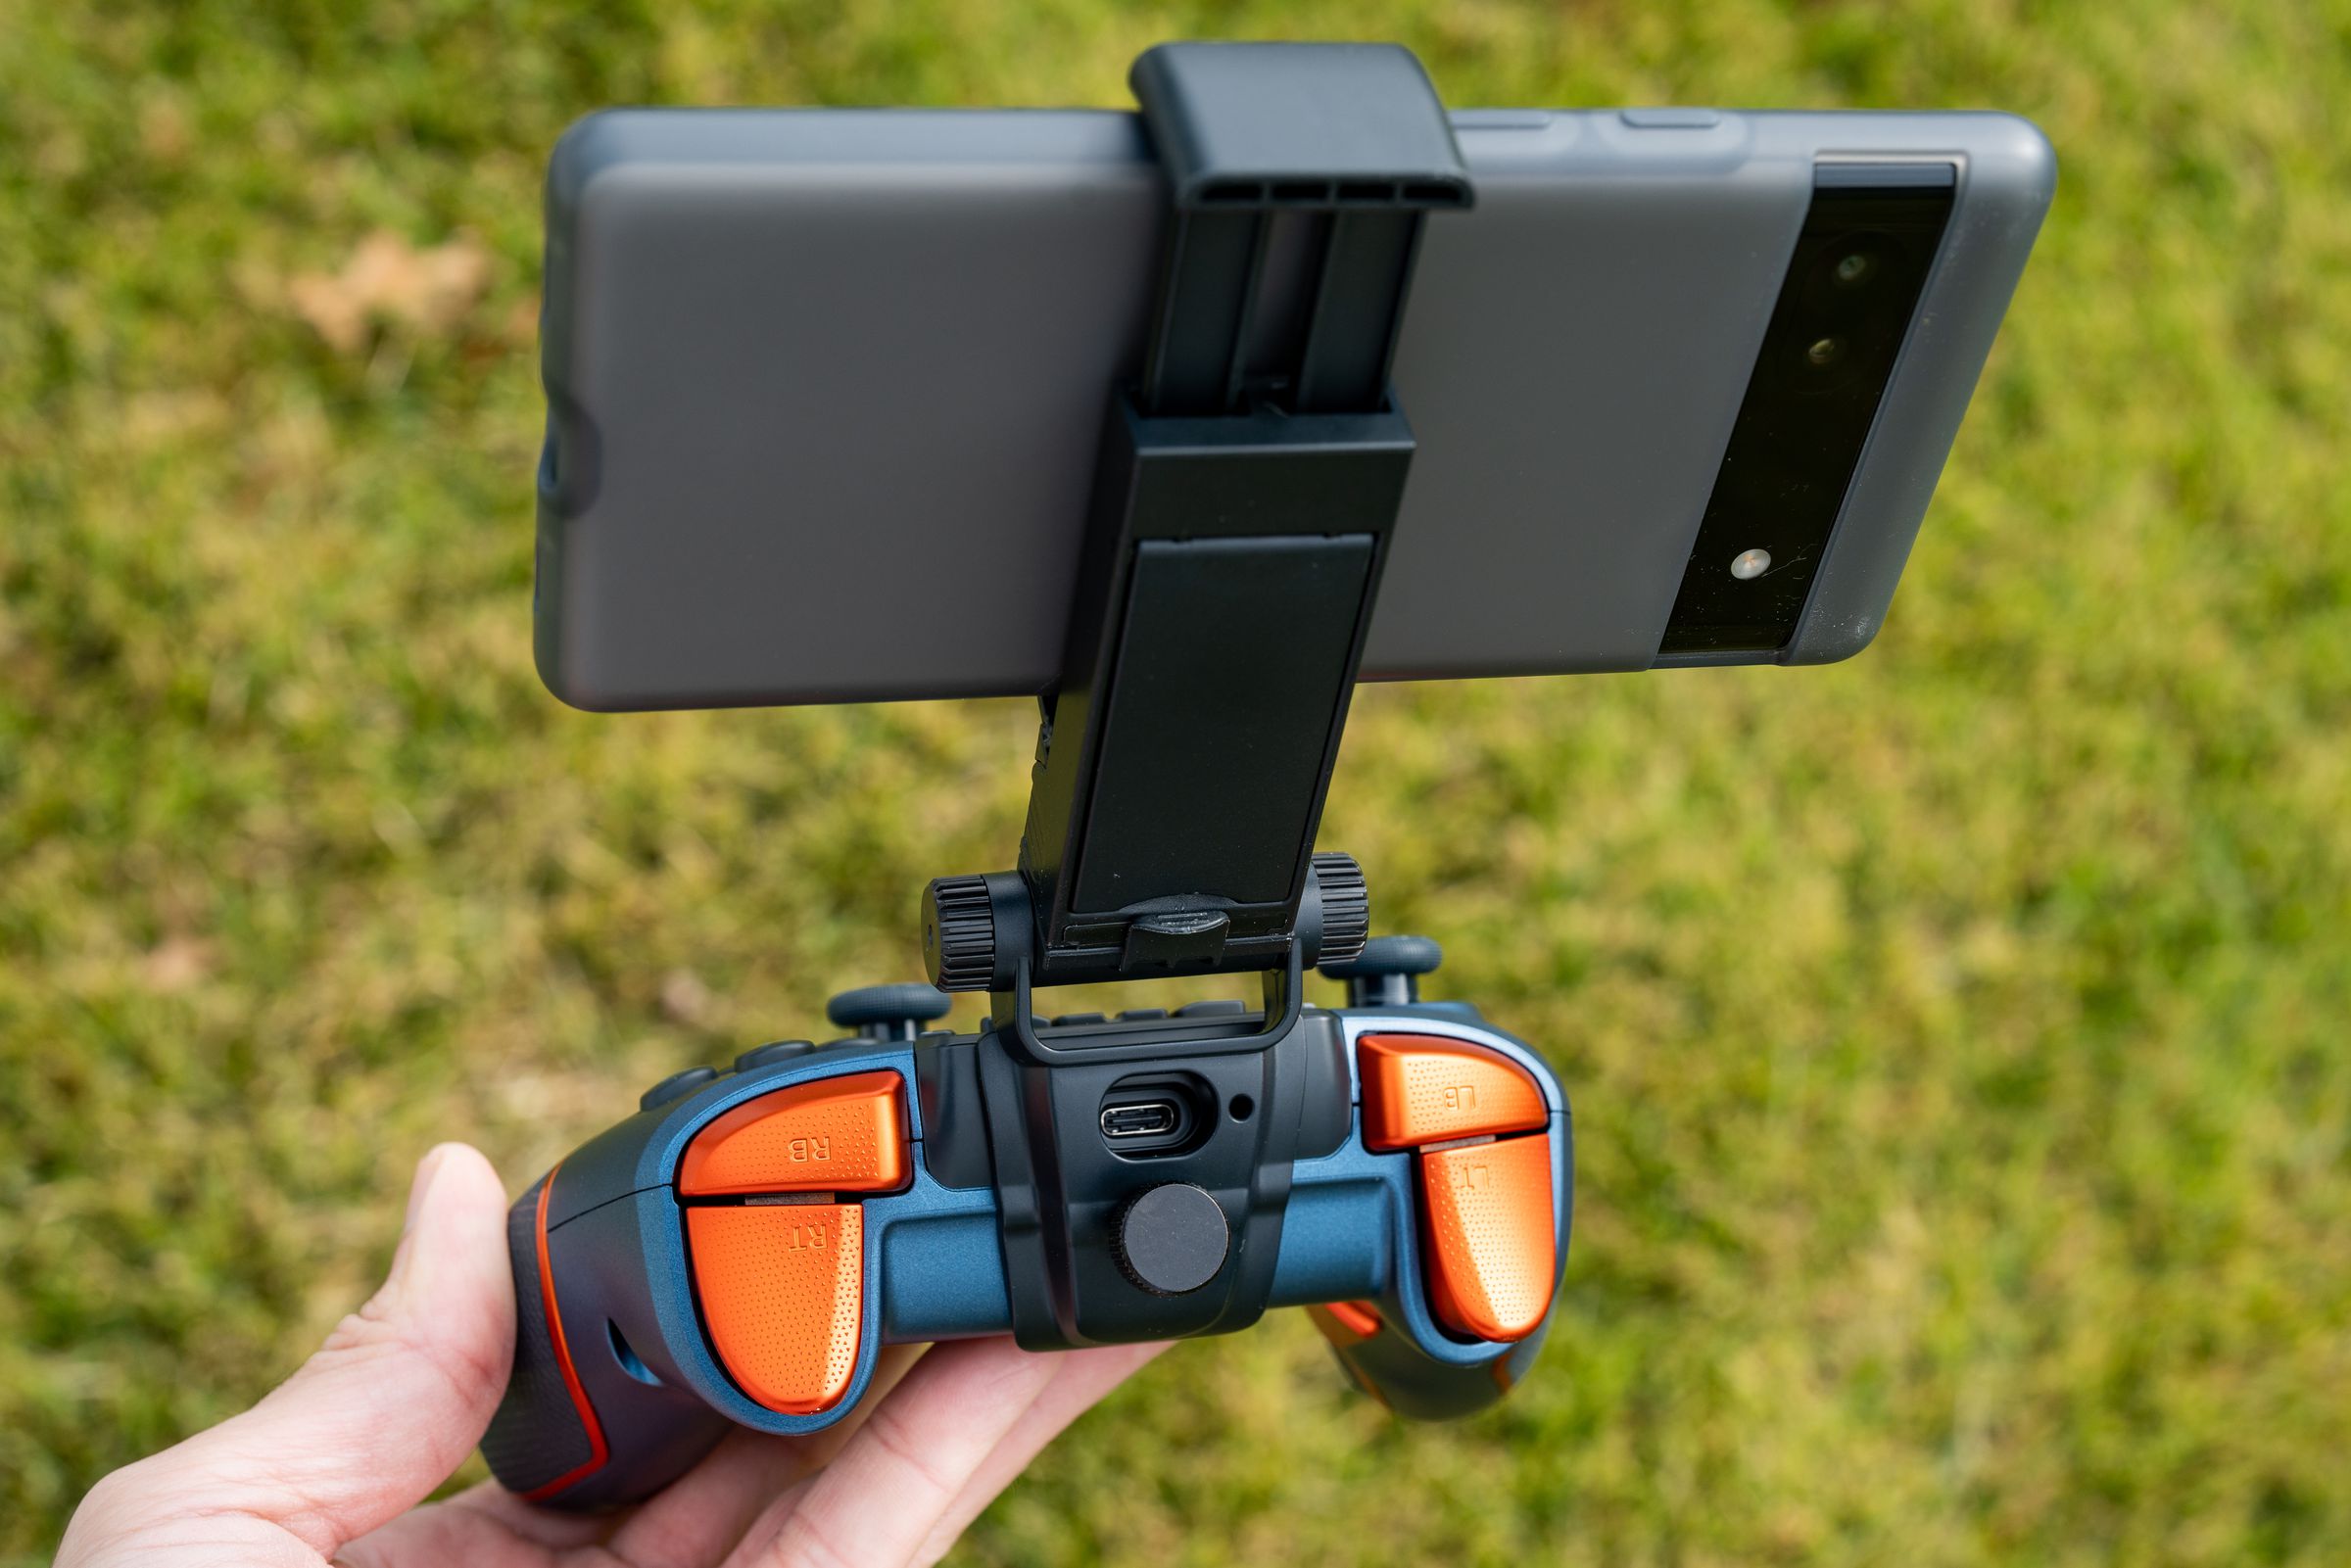 The mount allows access to the USB-C port. While the screws to adjust the angle are plastic, they feel fine.